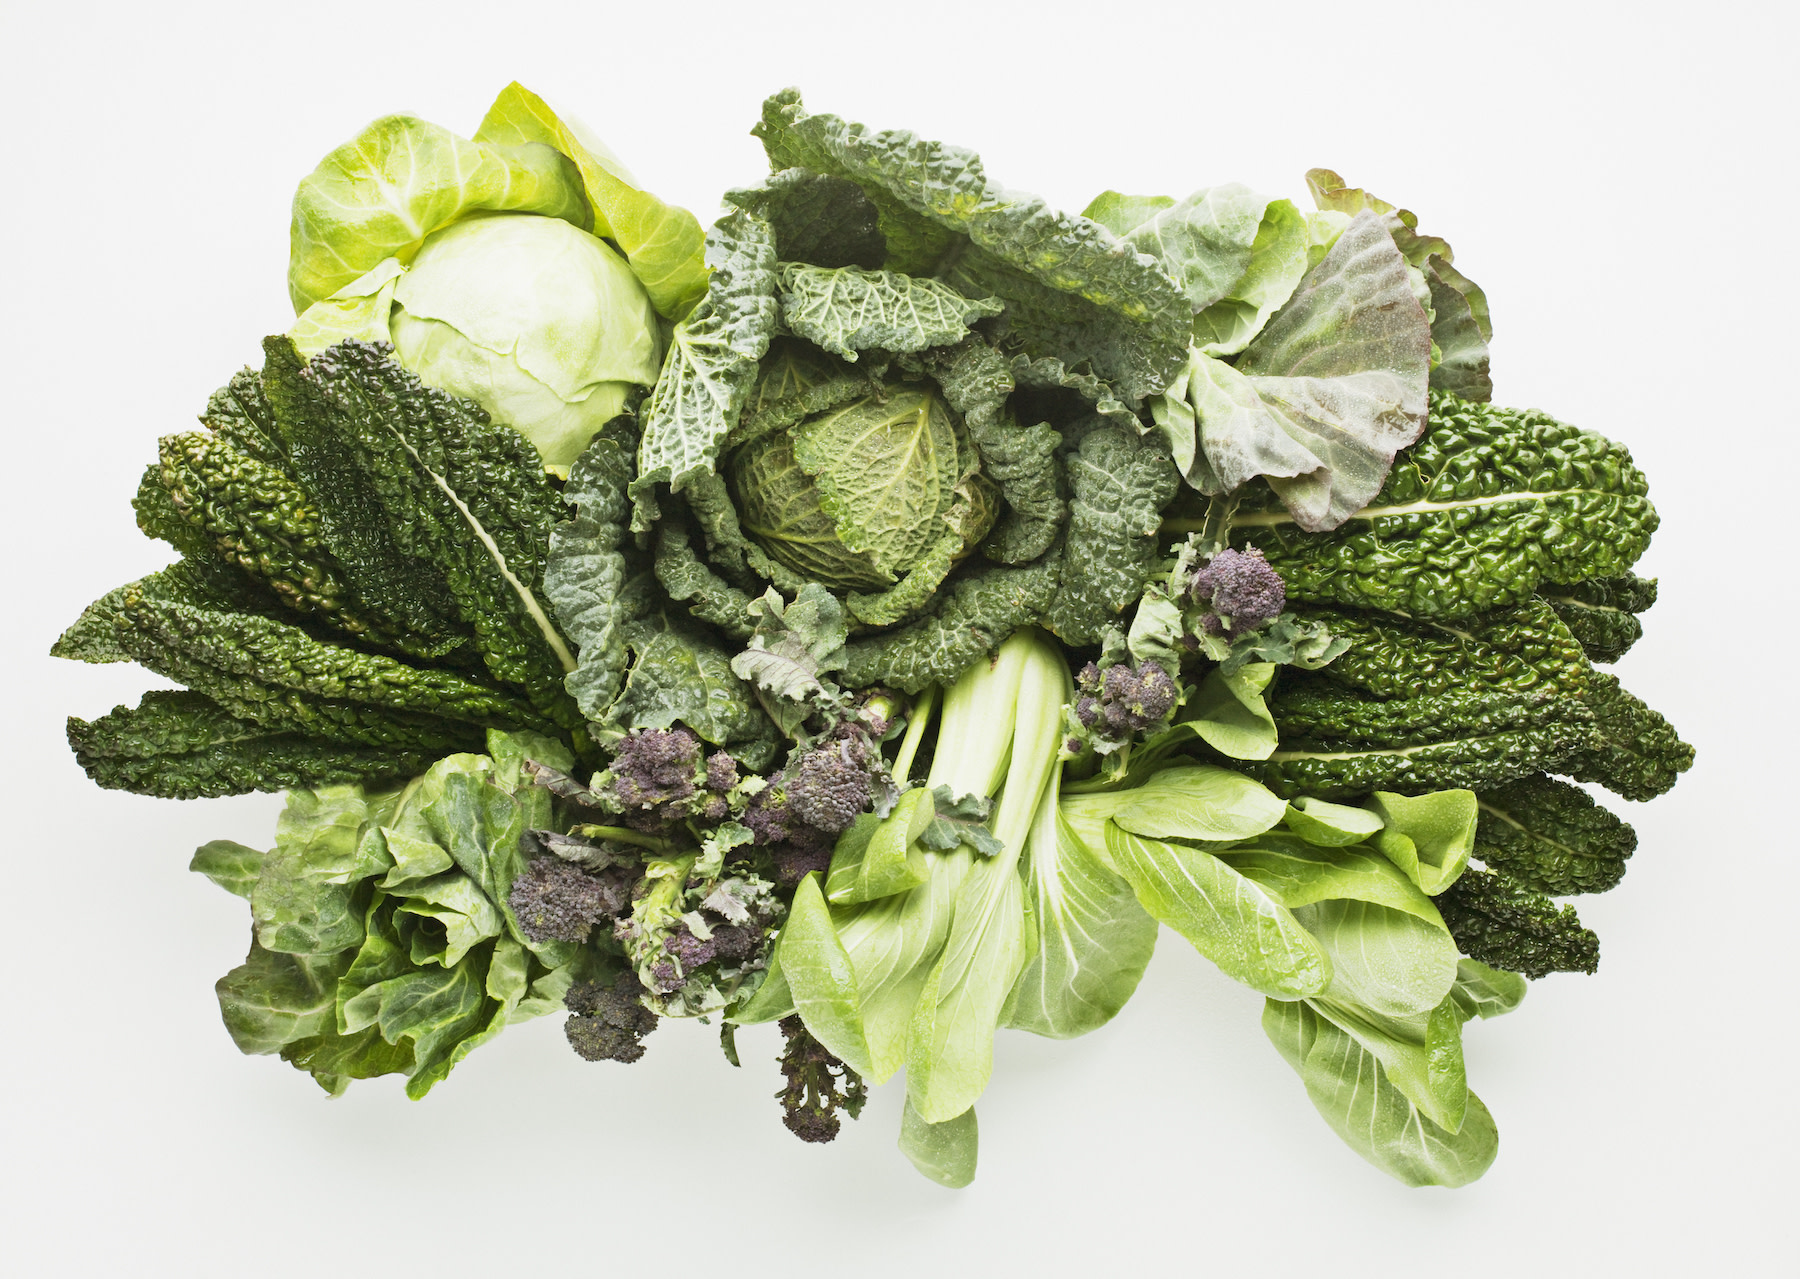 High-Fiber Foods: An array of leafy greens like kale and lettuce against a white background.